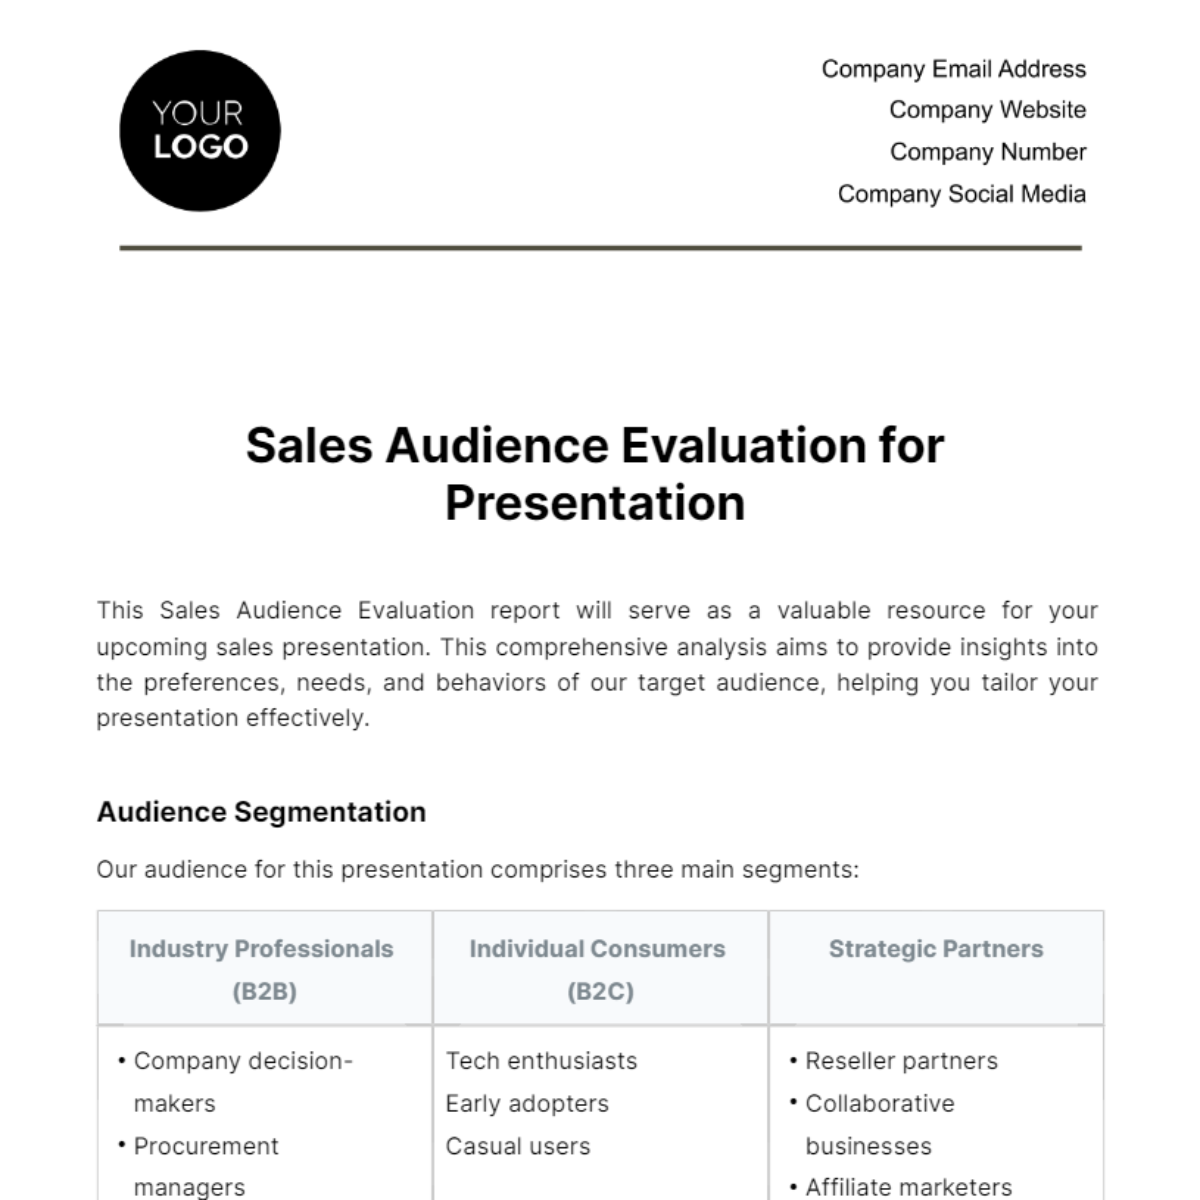 Free Sales Audience Evaluation for Presentation Template